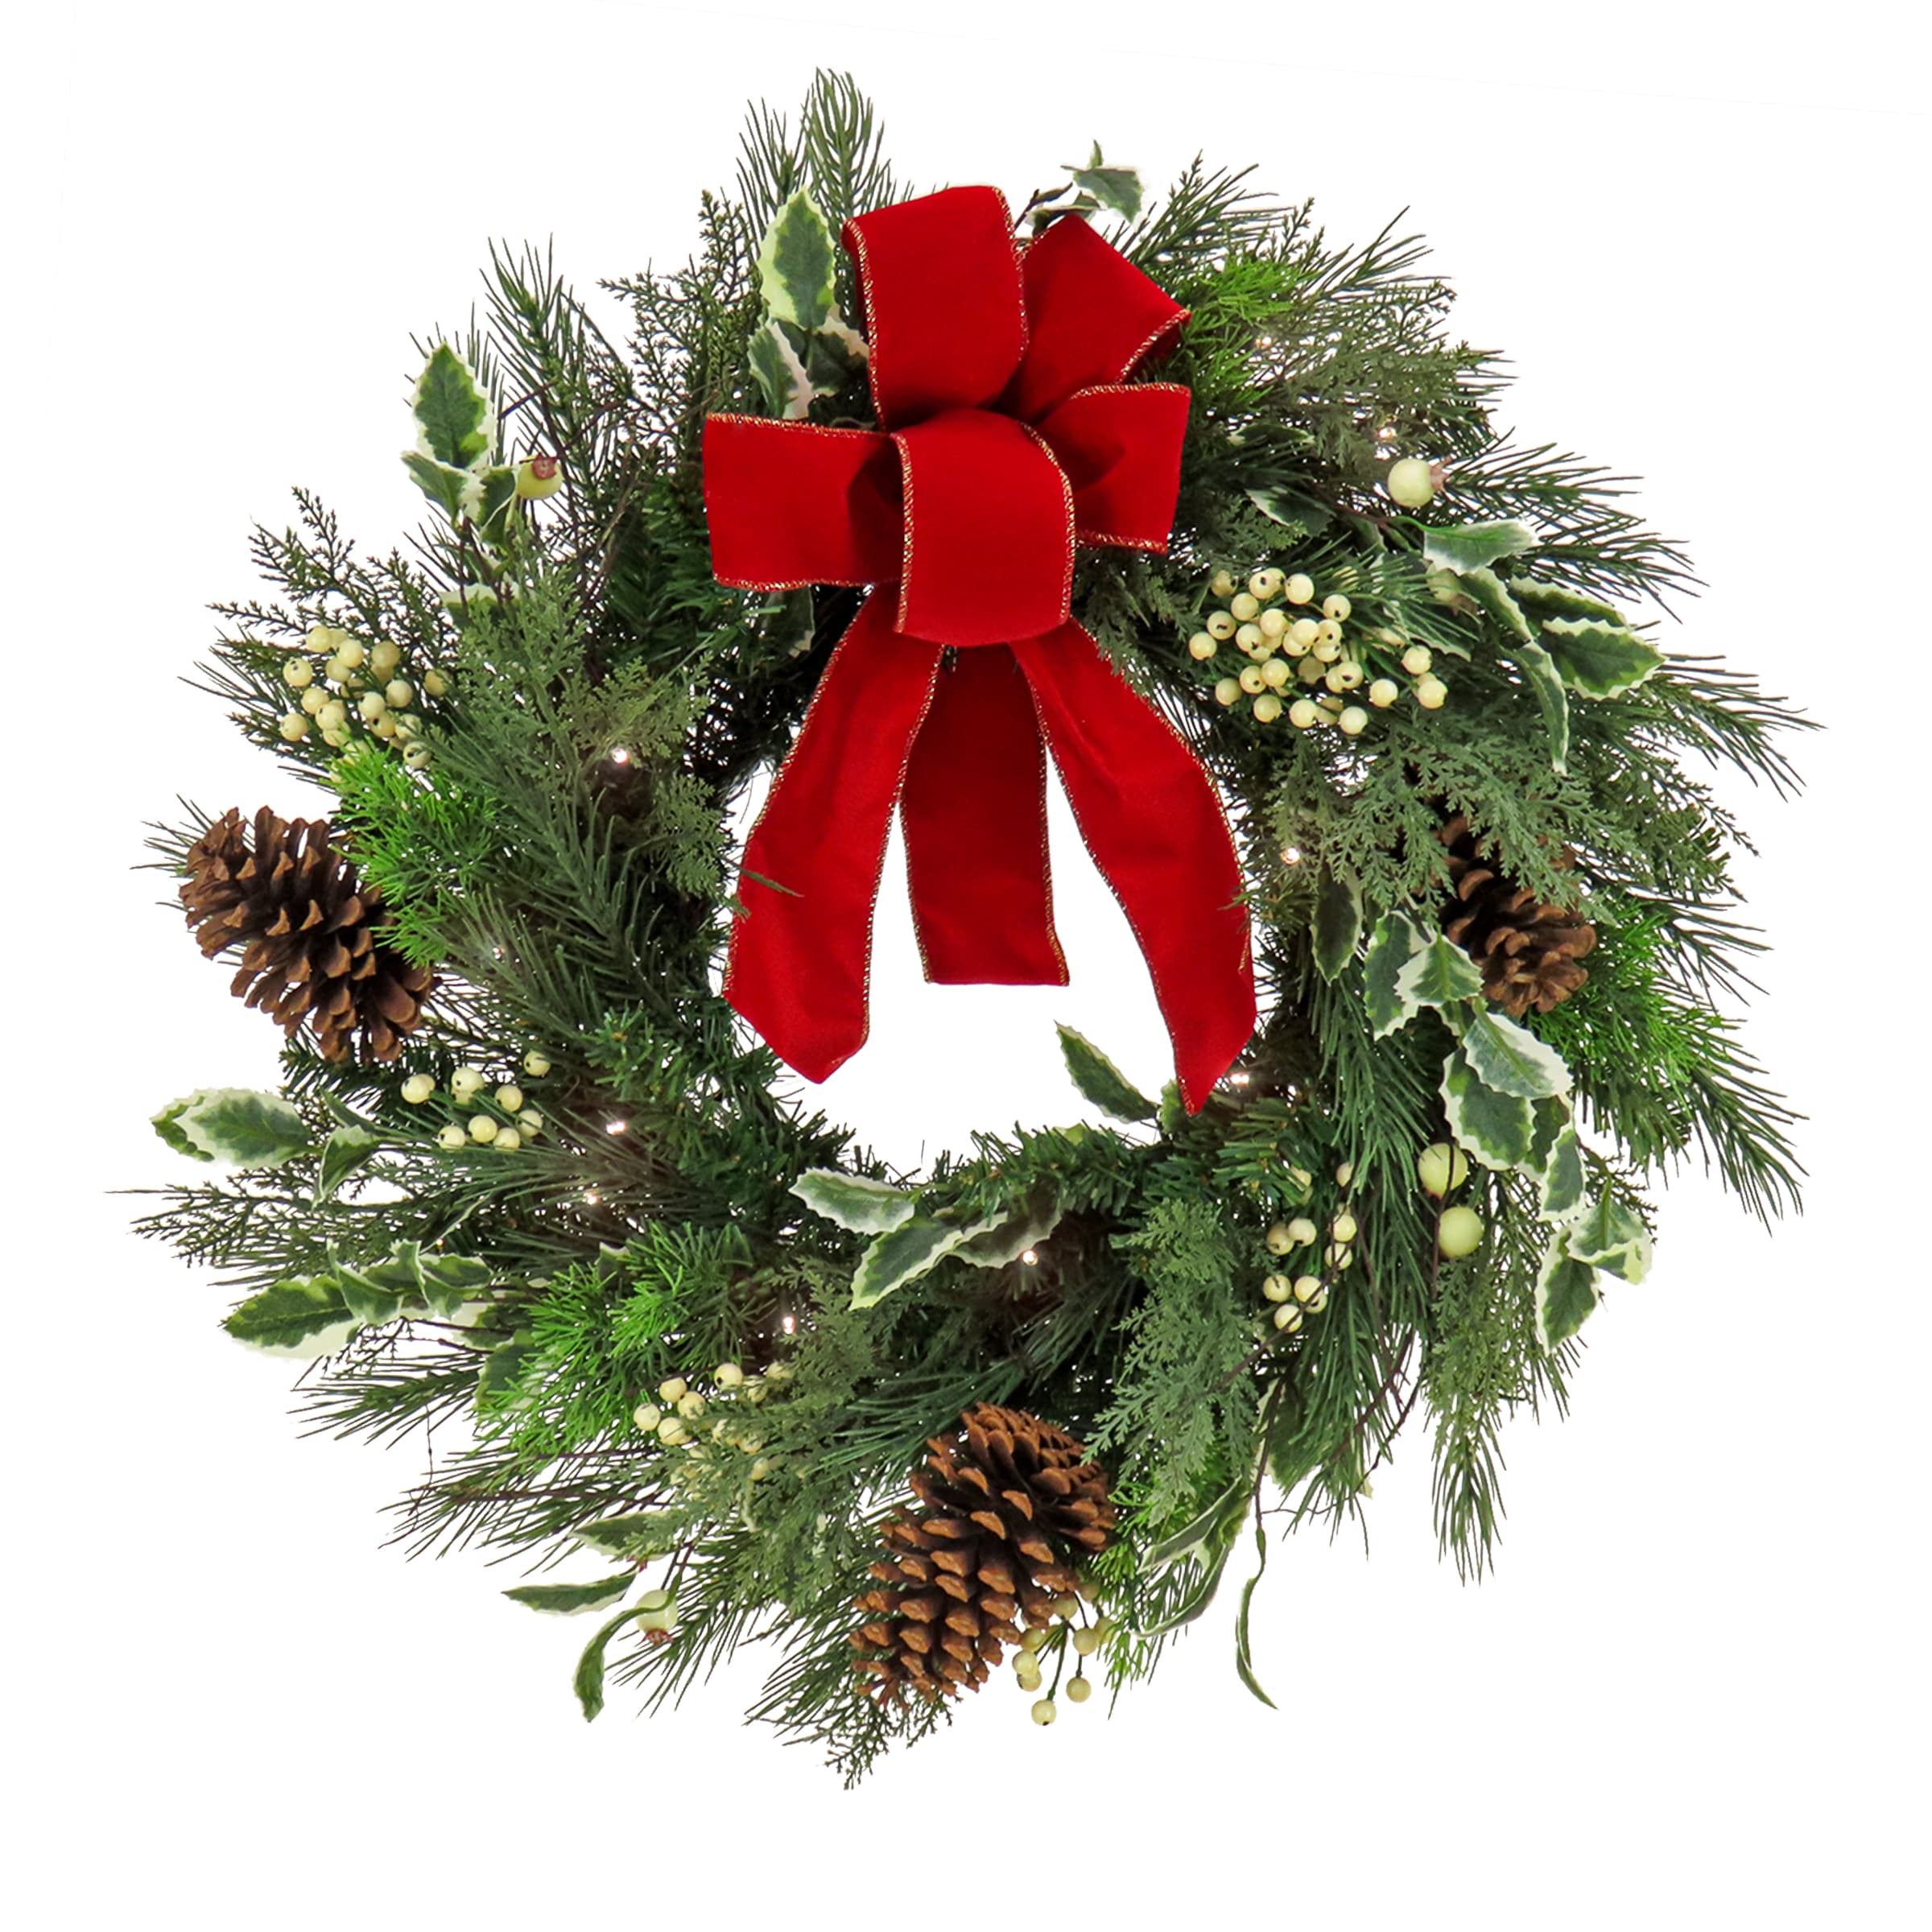 HGTV Home Collection Pre Lit Artificial Christmas Shrub Planter Filler,  Mixed Branch Tips, Decorated with Pinecones and Berries, Battery Powered,  28 Inches